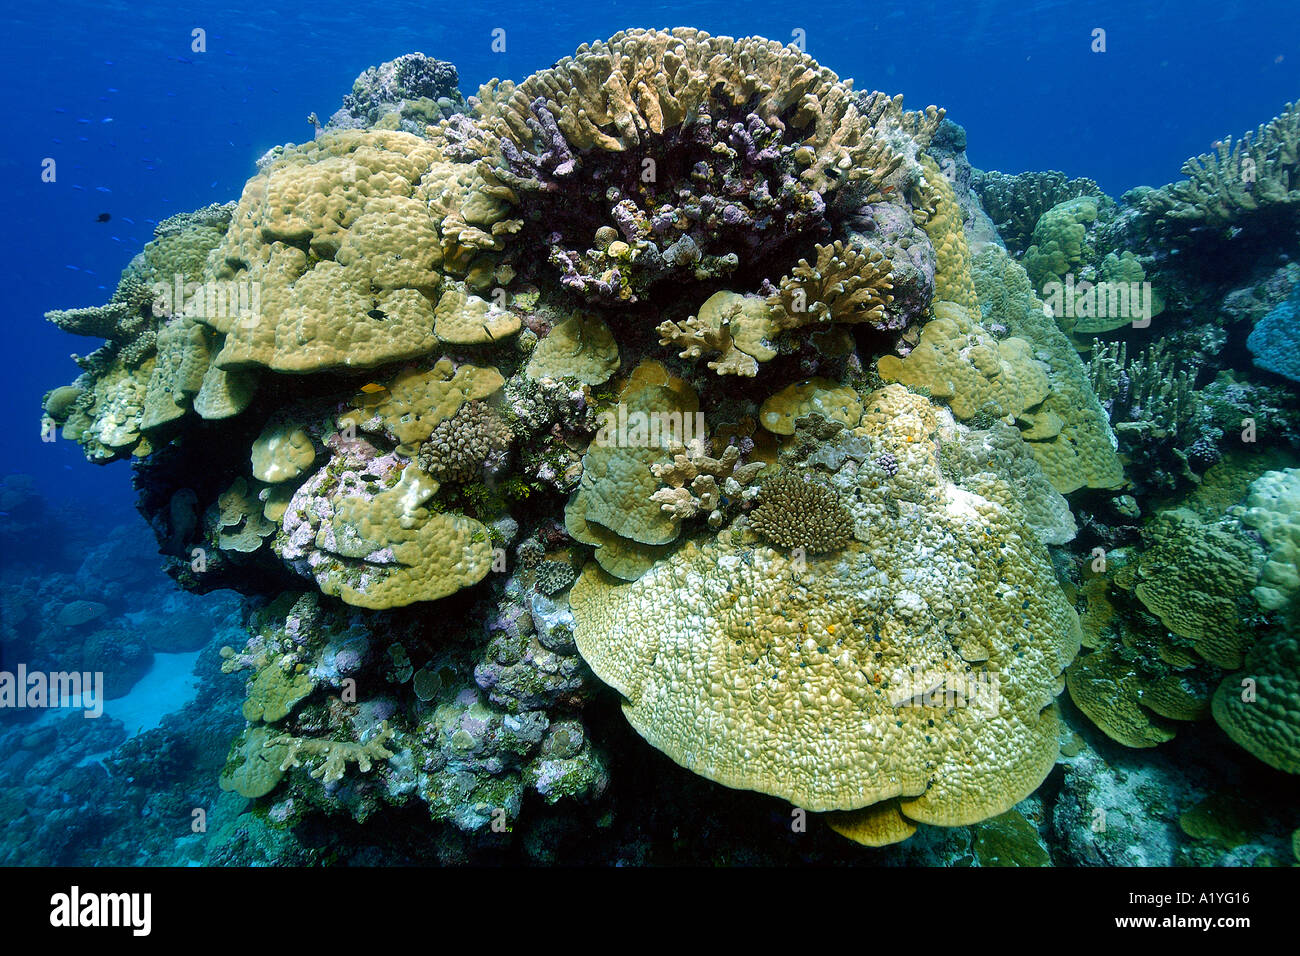 Coral reef mainly lobe coral Porites sp Namu atoll Marshall Islands N Pacific Stock Photo